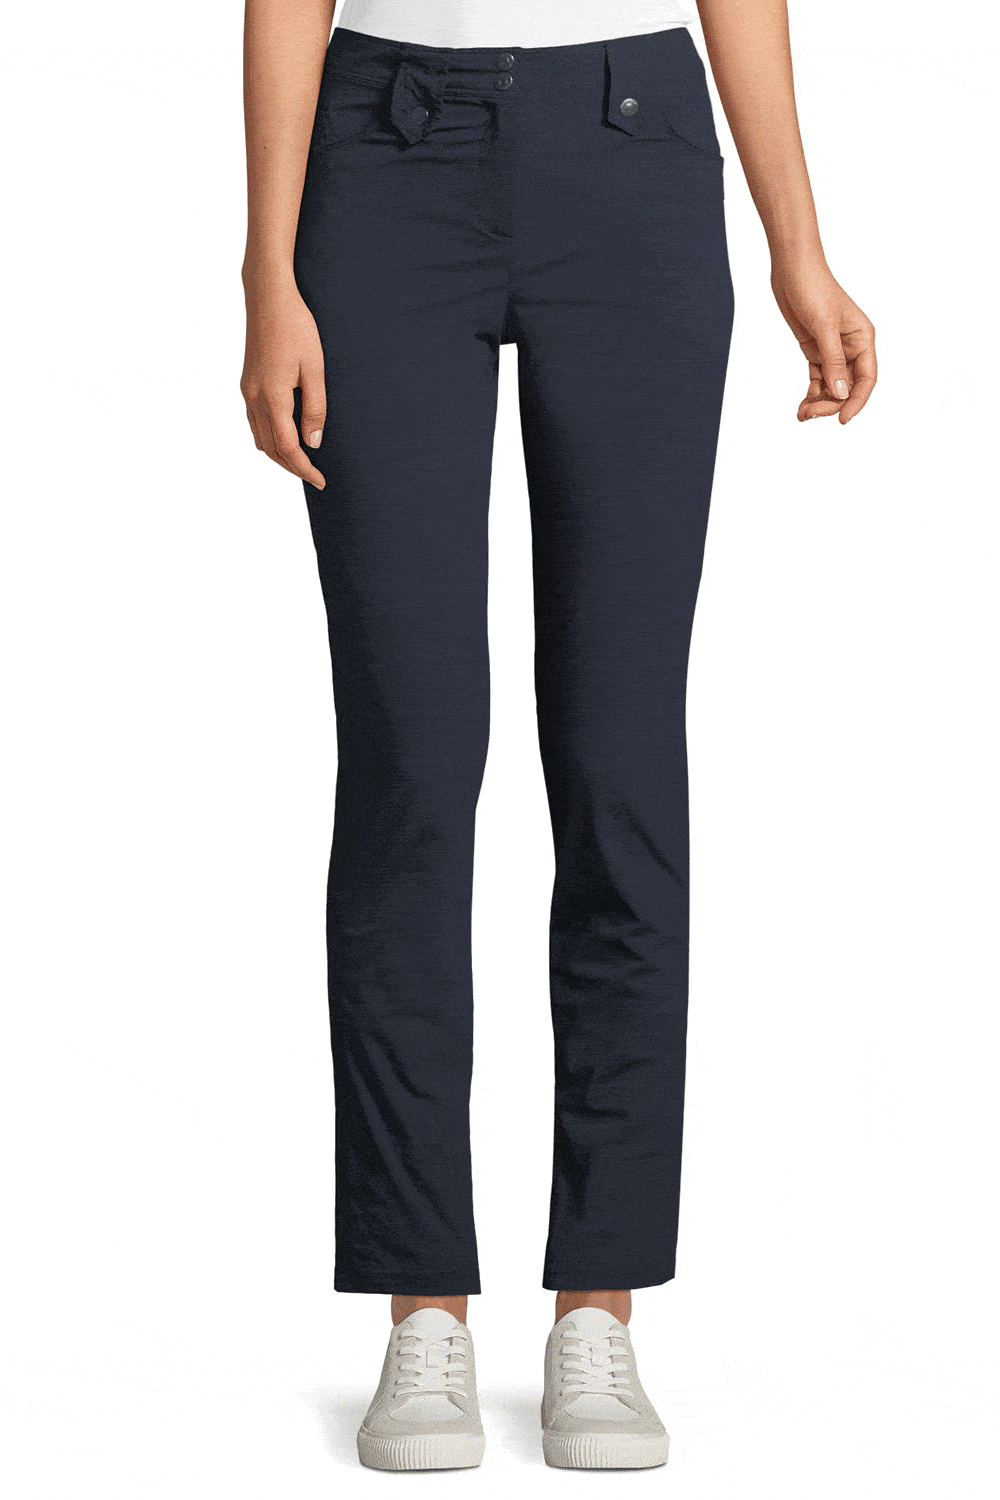 Best Travel Pants for Women 2022 - Comfy, Chic Pants for Travel